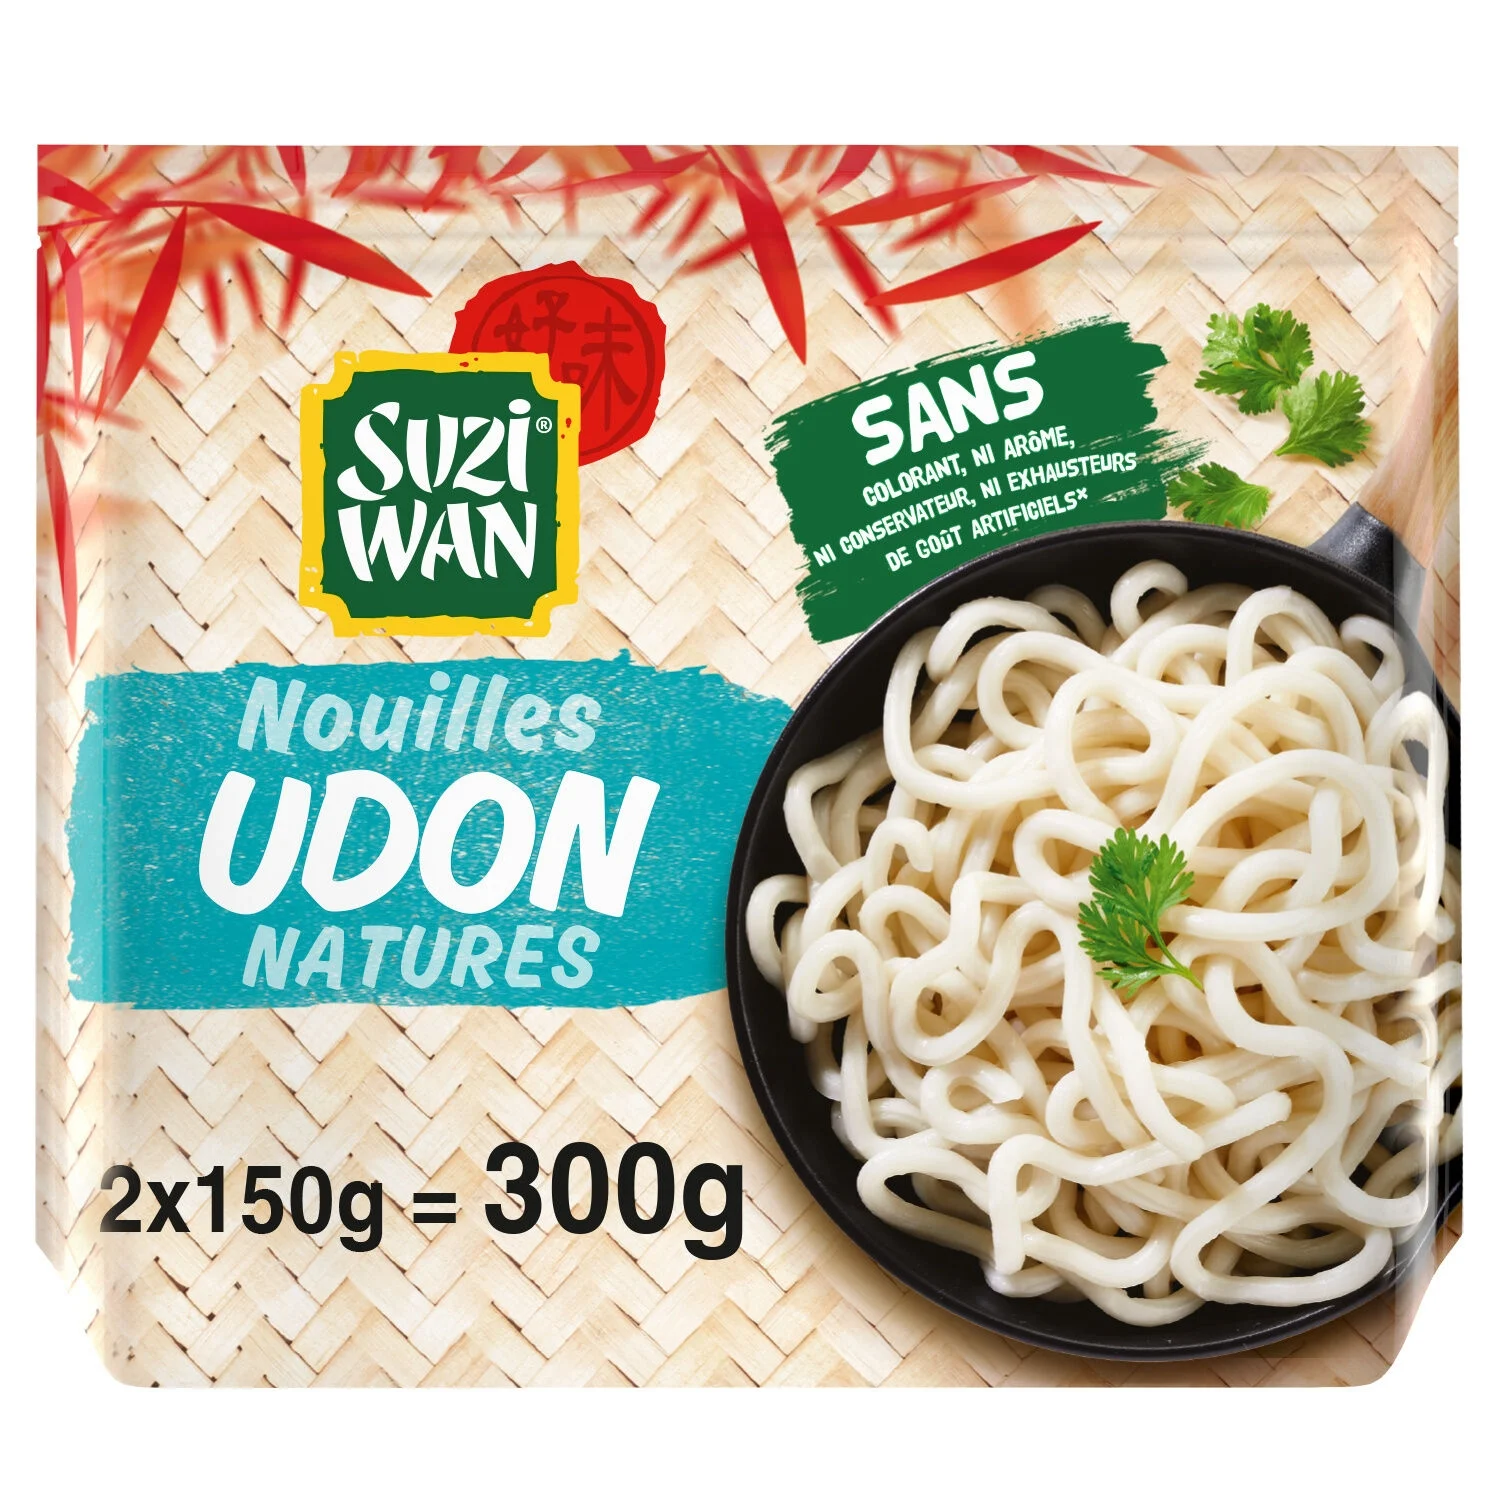 Mì udon 2x150g